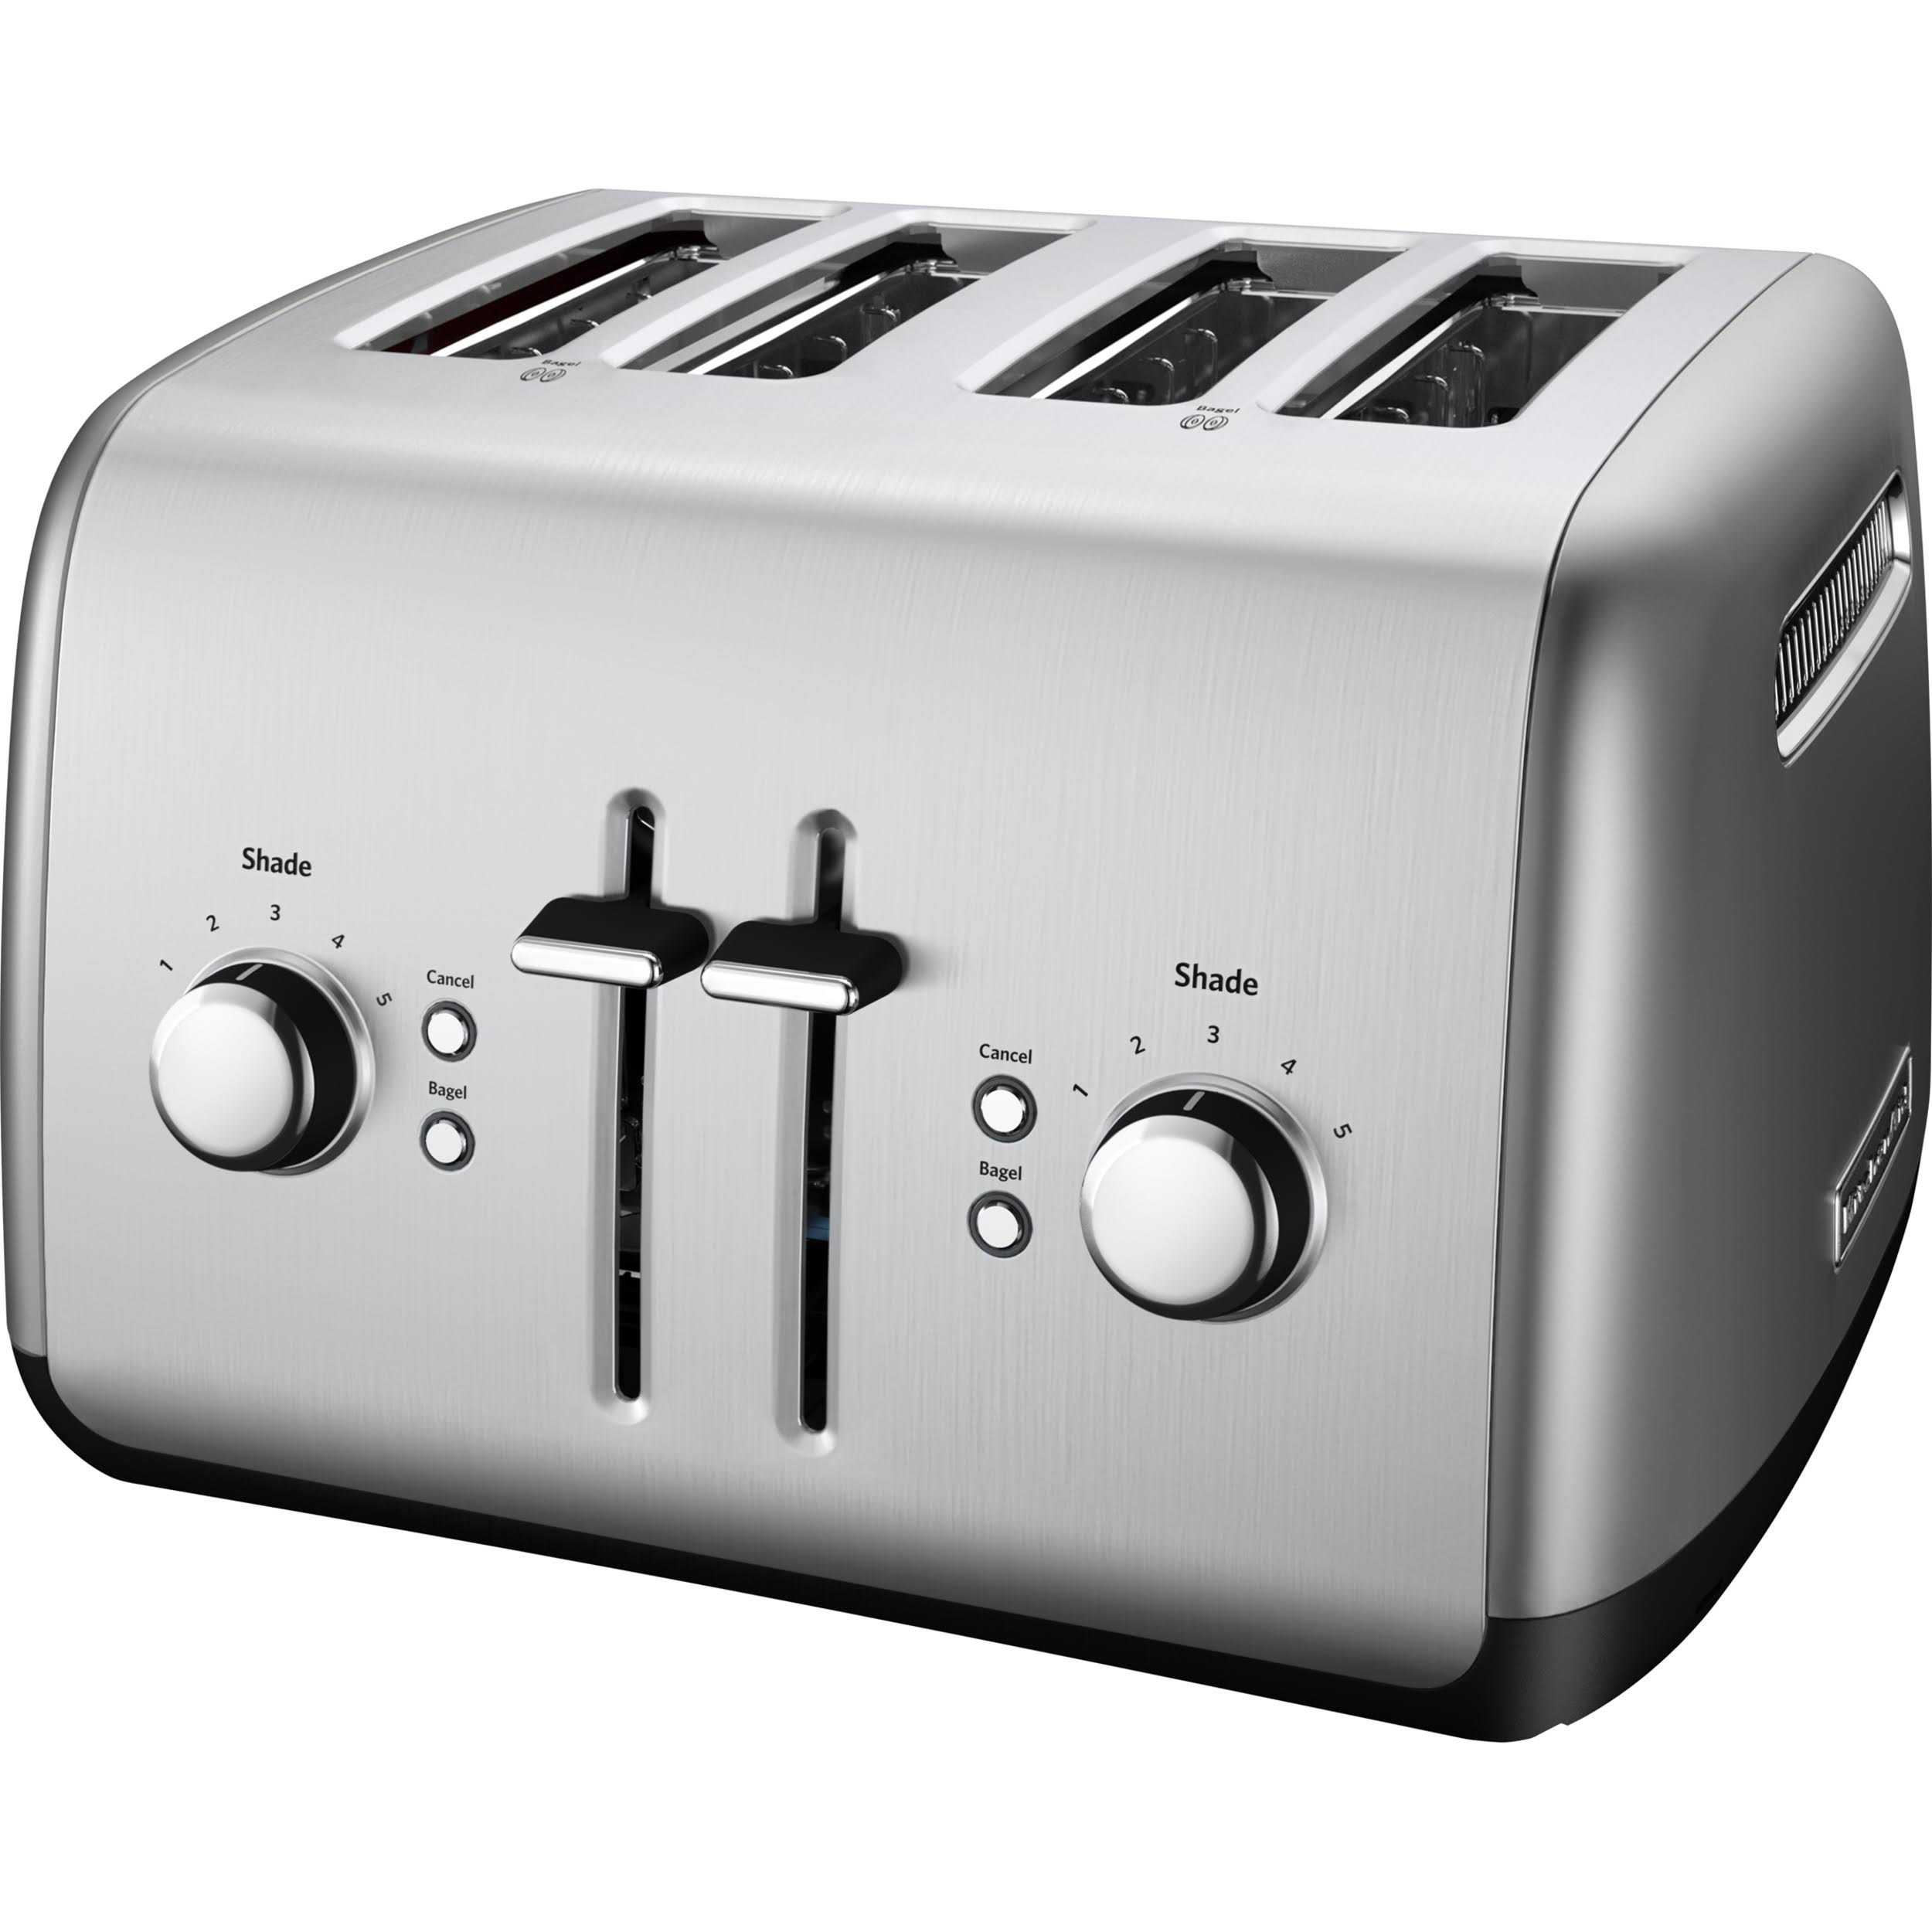 KitchenAid KMT4115CU 4 Slice Toaster - with Manual High Lift Lever, Contour Silver